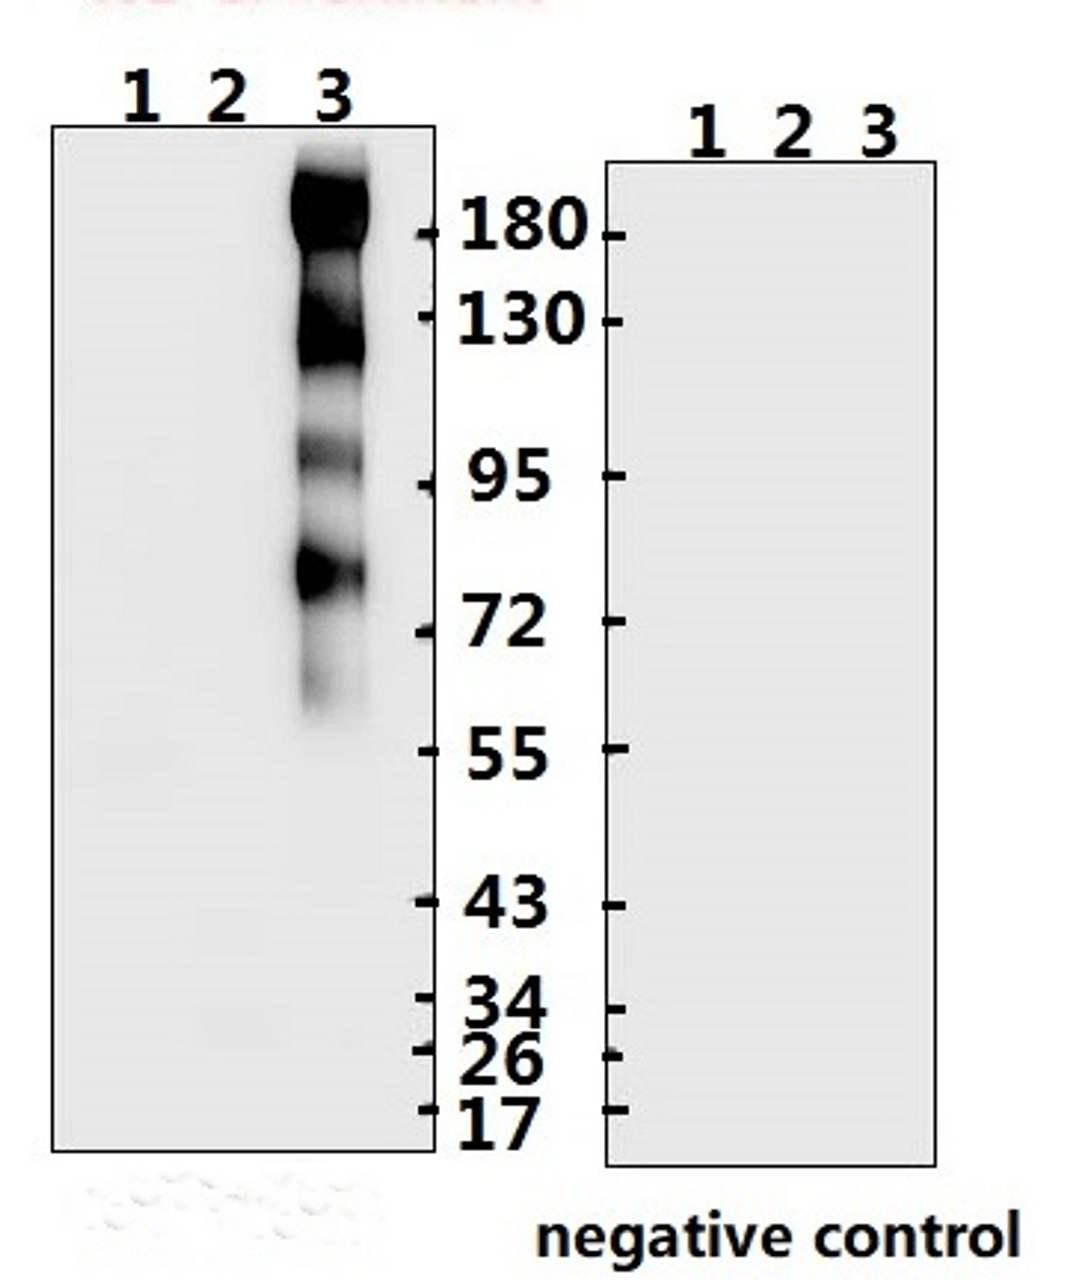 <strong>Figure 1 Western Blot Validation with Recombinant Protein</strong><br>Loading: 1ug of recombinant protein per lane. Lane 1: 10-007, Lane 2: 10-008 and Lane 3: 10-011. Antibodies: SARS-CoV-2 (COVID-19) Spike S2, 10-526, 1:500. Secondary: Goat anti-rabbit IgG HRP conjugate at 1:20000 dilution.